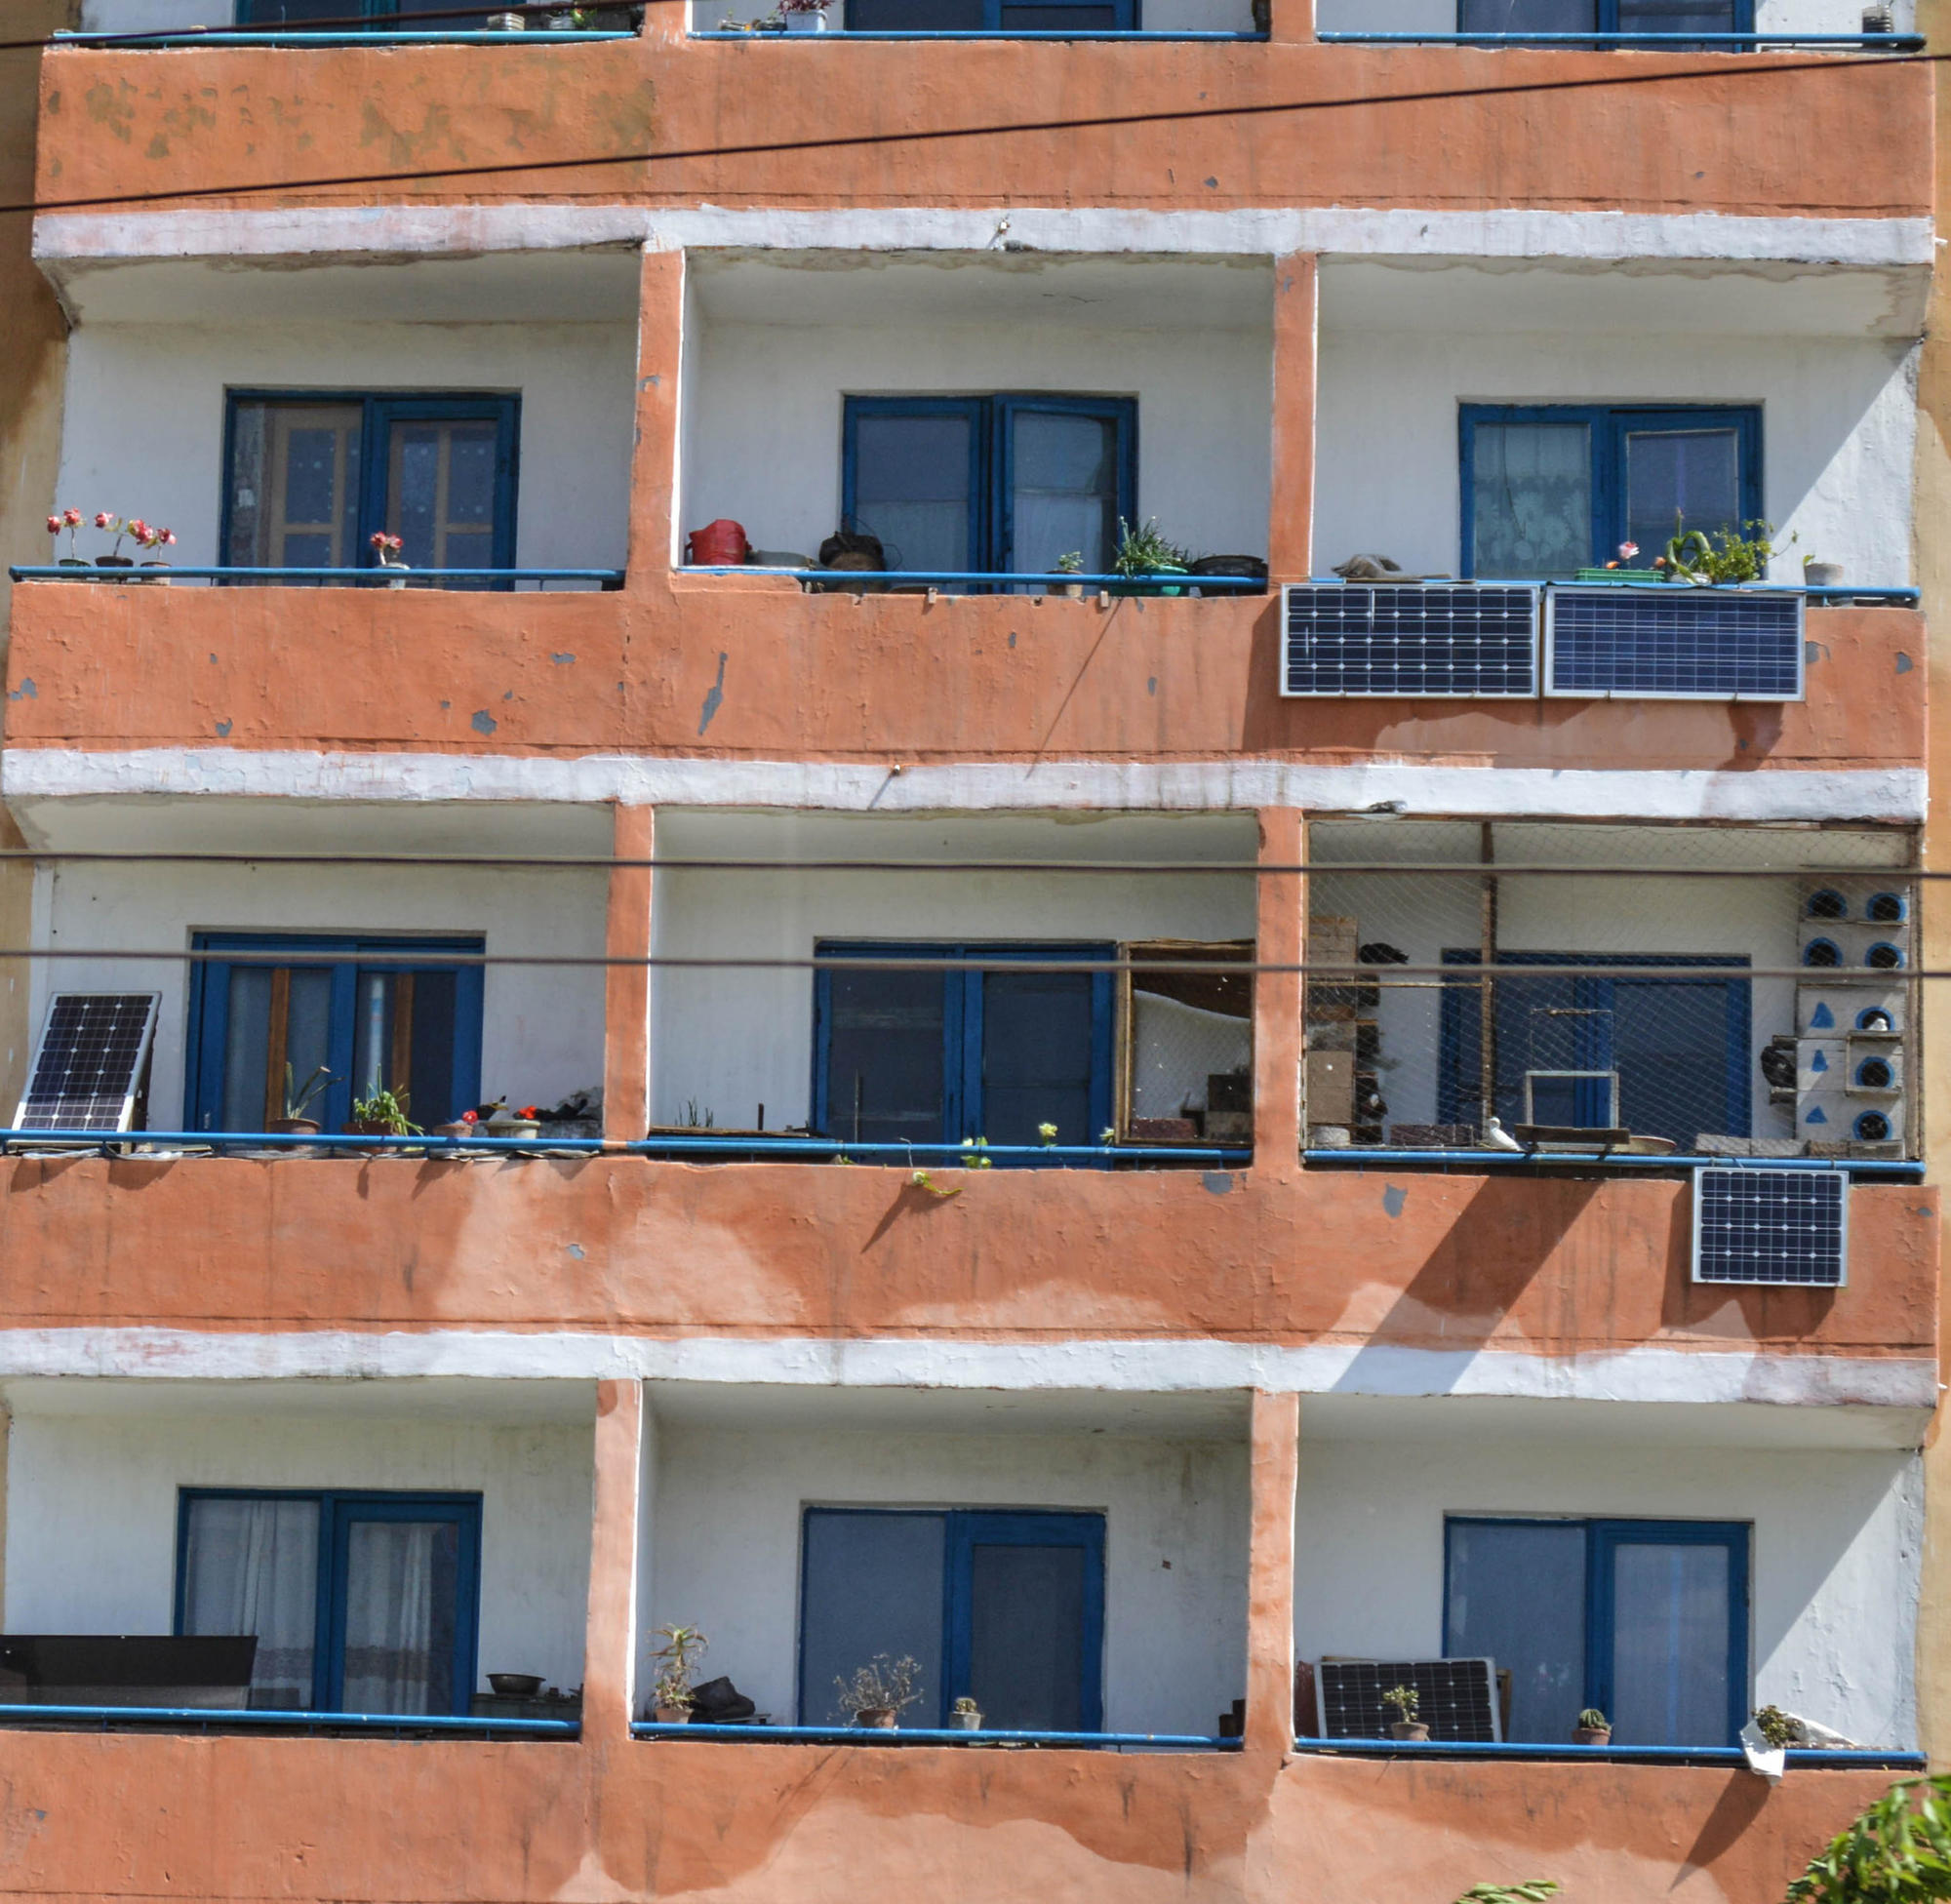 Solar panels seen on individual balconies at an apartment building in Pyongyang, North Korea.